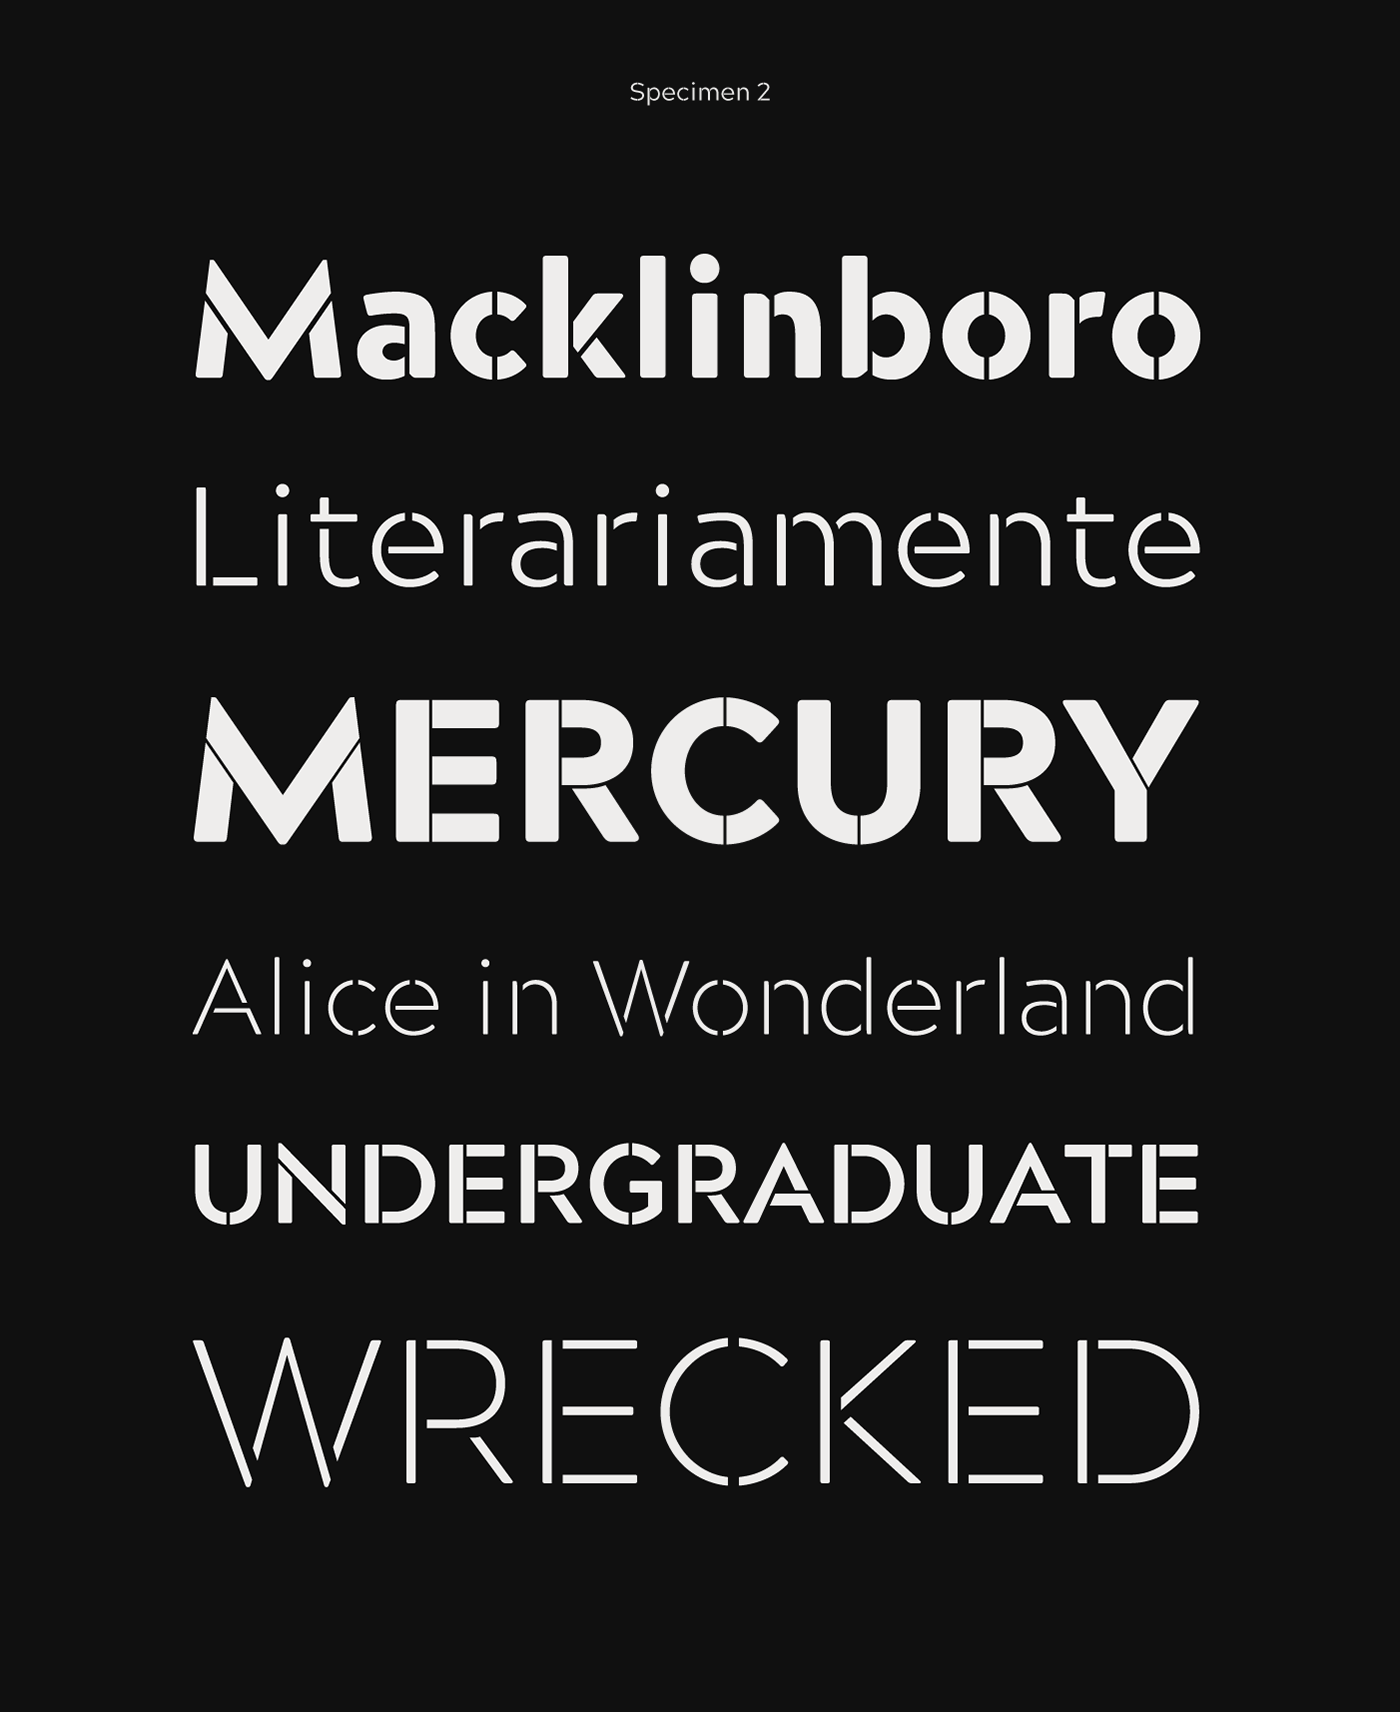 Acherus grotesque stencil rounded Typefamily Typeface grotesk sportive challenger geometric